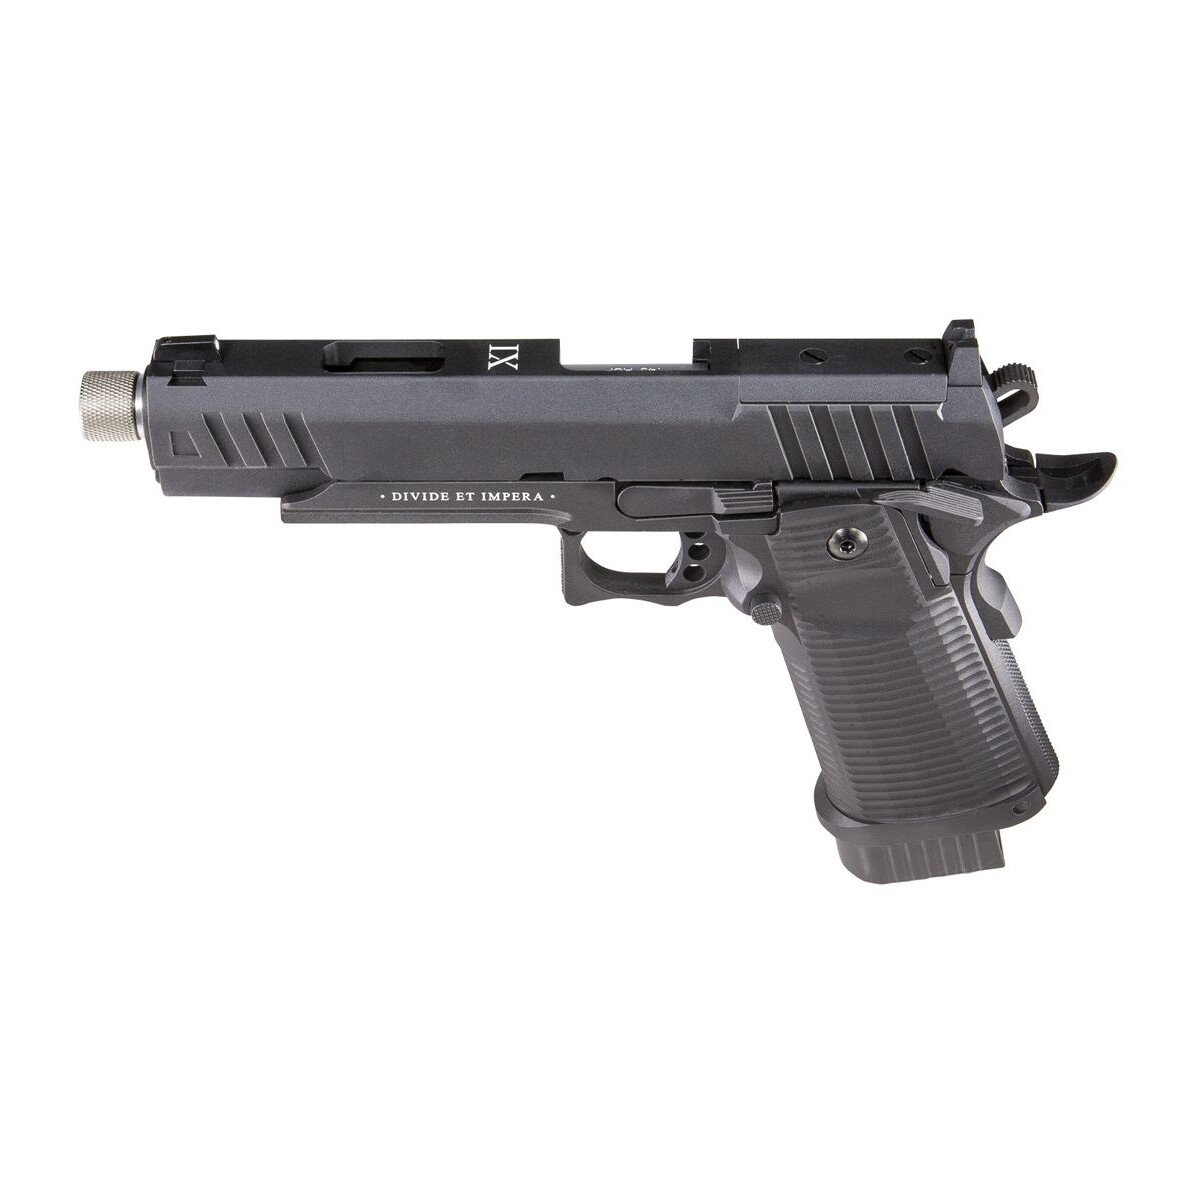 SECUTOR ARMS LUDUS XI SILVER CO2 BLOW BACK PISTOL